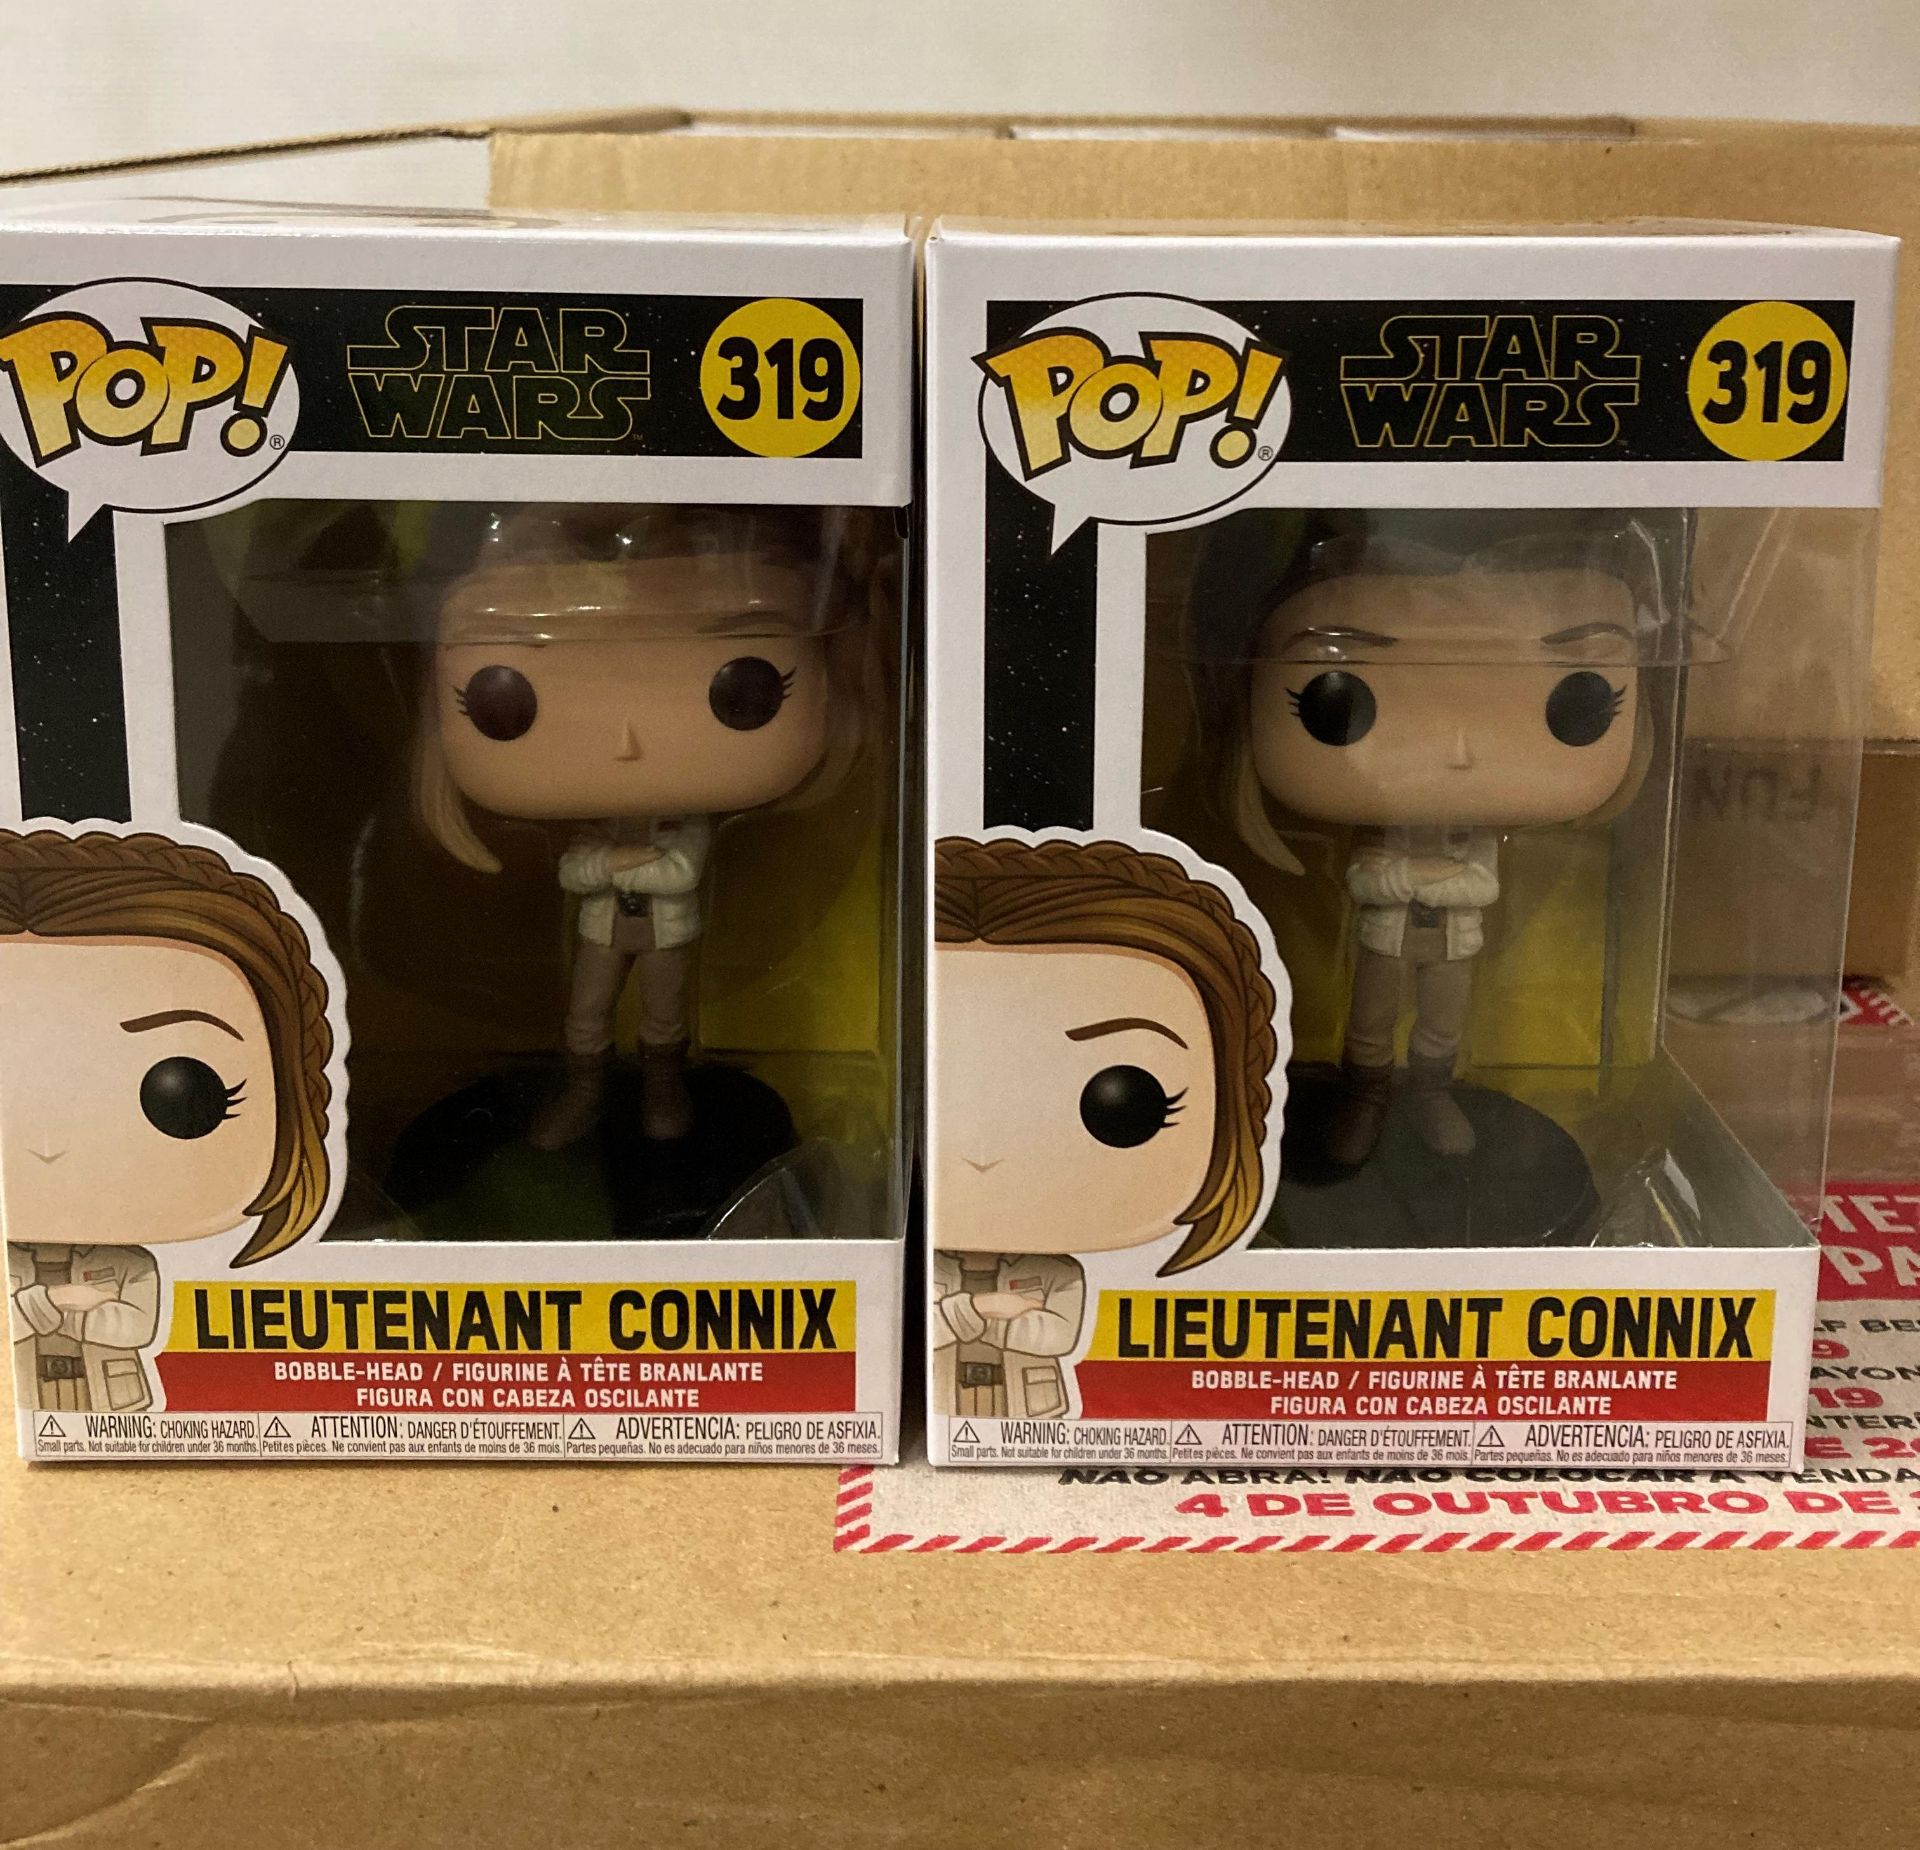 5 x Cases of 36 x Funko POP! Figurine Star Wars: The Rise of Skywalker - Lieutenant Connix - Image 2 of 2